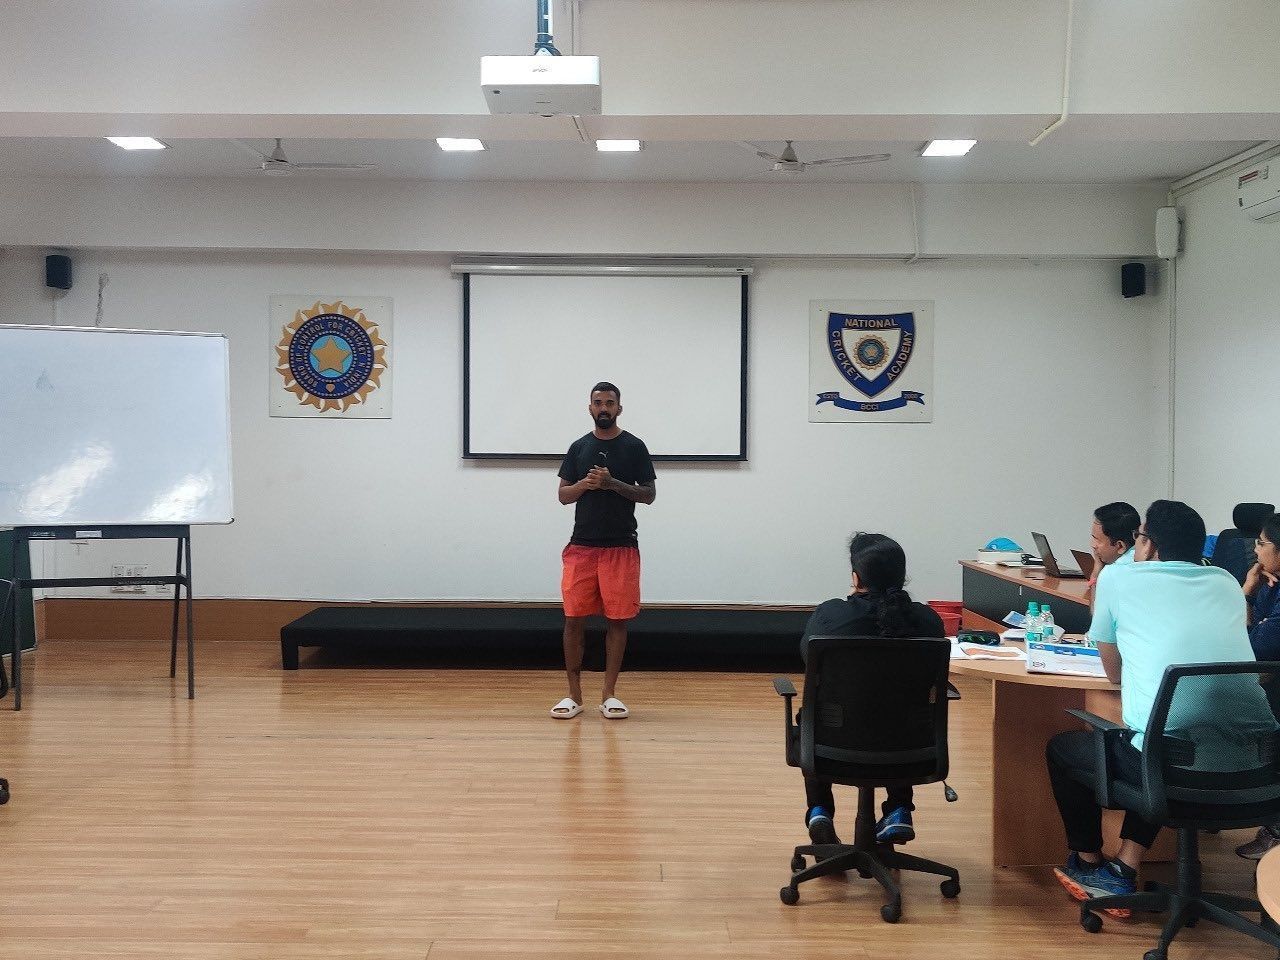 KL Rahul sharing his thoughts with candidates attending the Level-3 coach certification course at the NCA. Pic: VVS Laxman/ Twitter